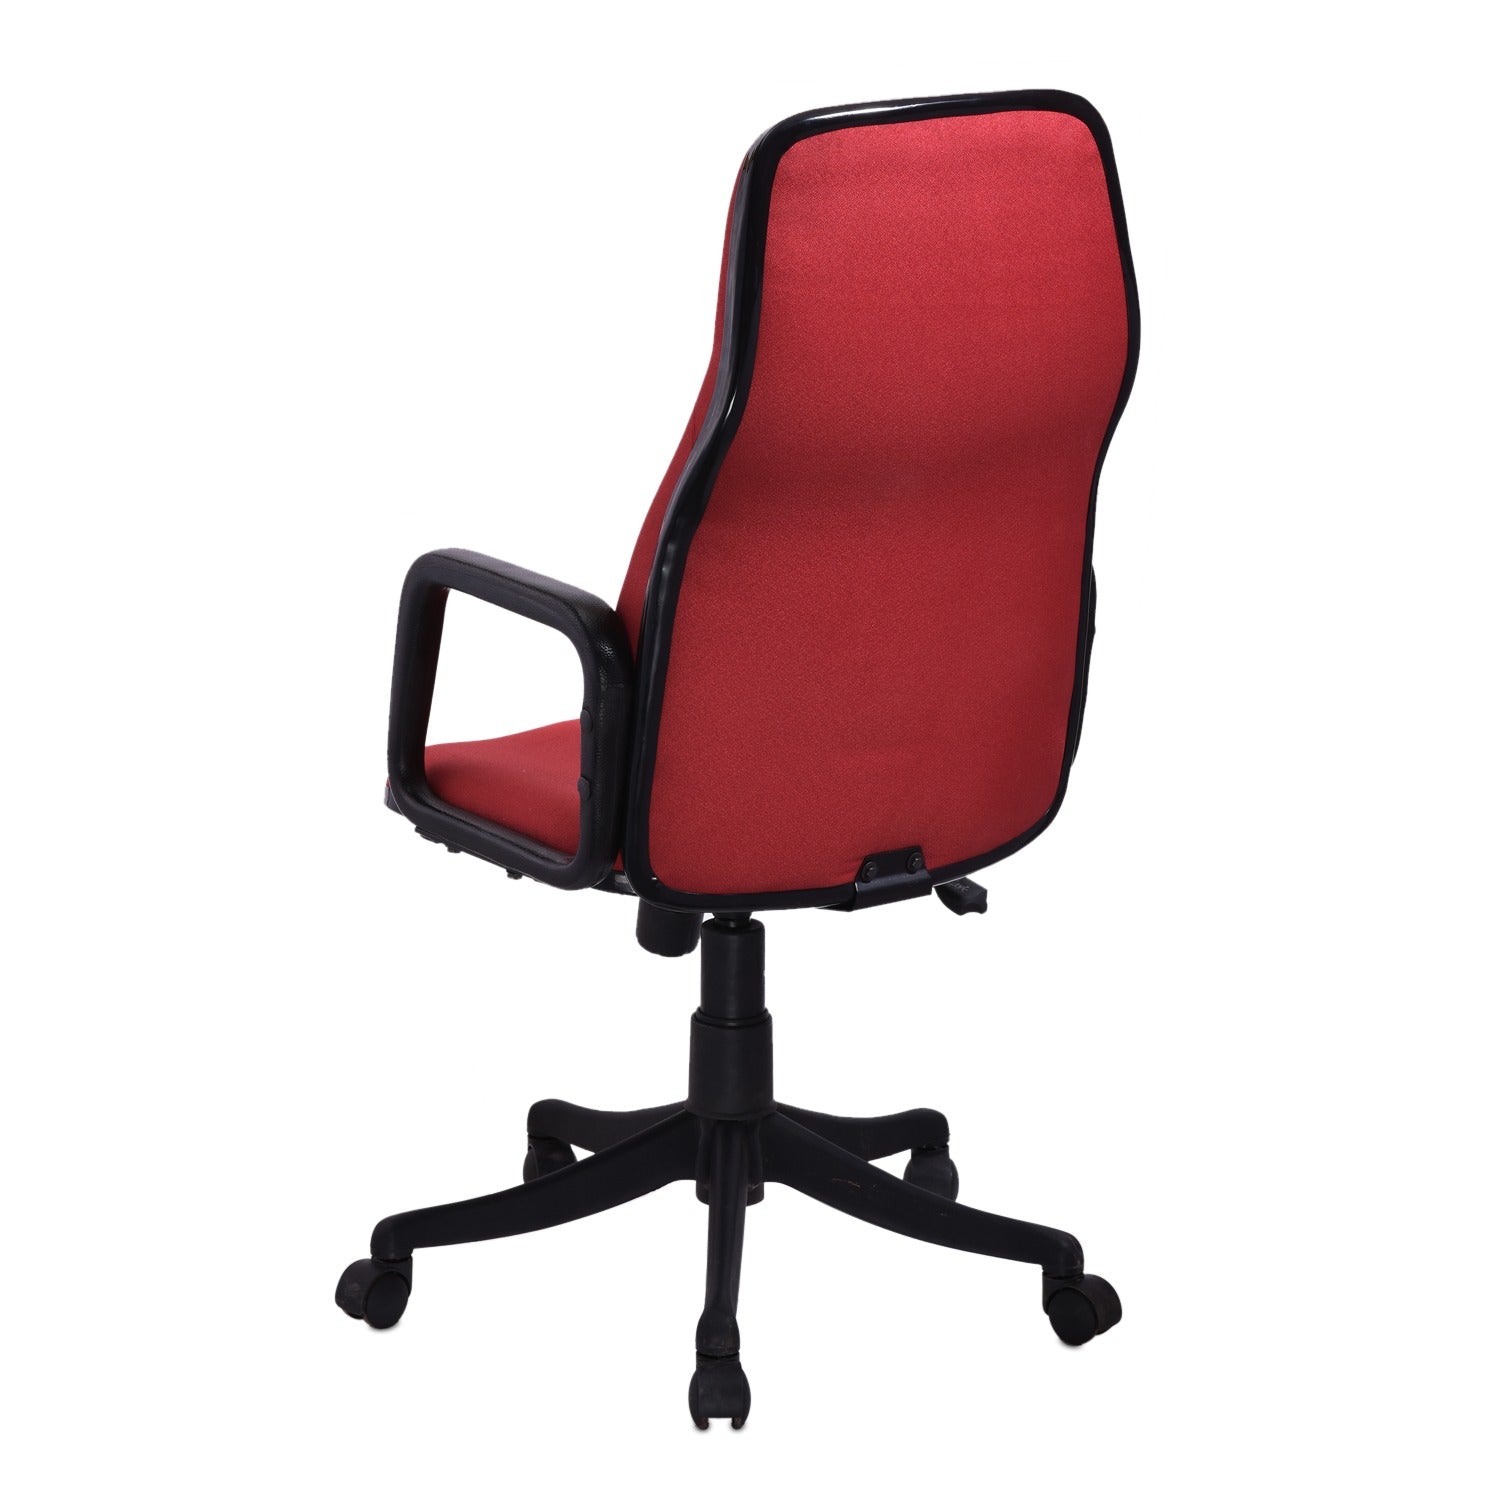 ZSE1023 High Back Chair by Zorin in Red Color Zorin